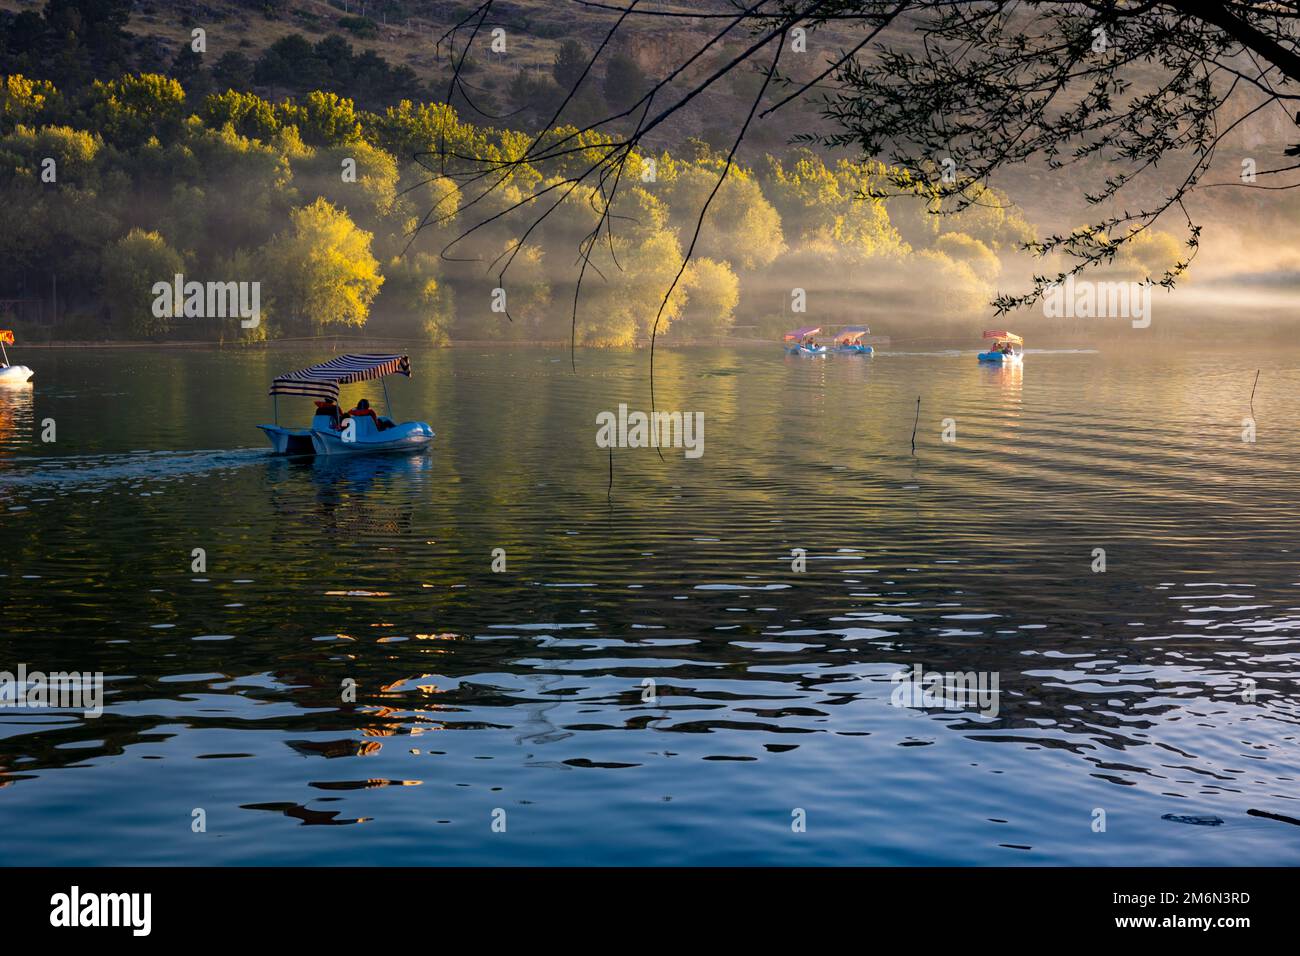 Paddleboats or pedal boats on the lake at sunset with haze or mist. Leisure time or weekend activity concept photo. Stock Photo